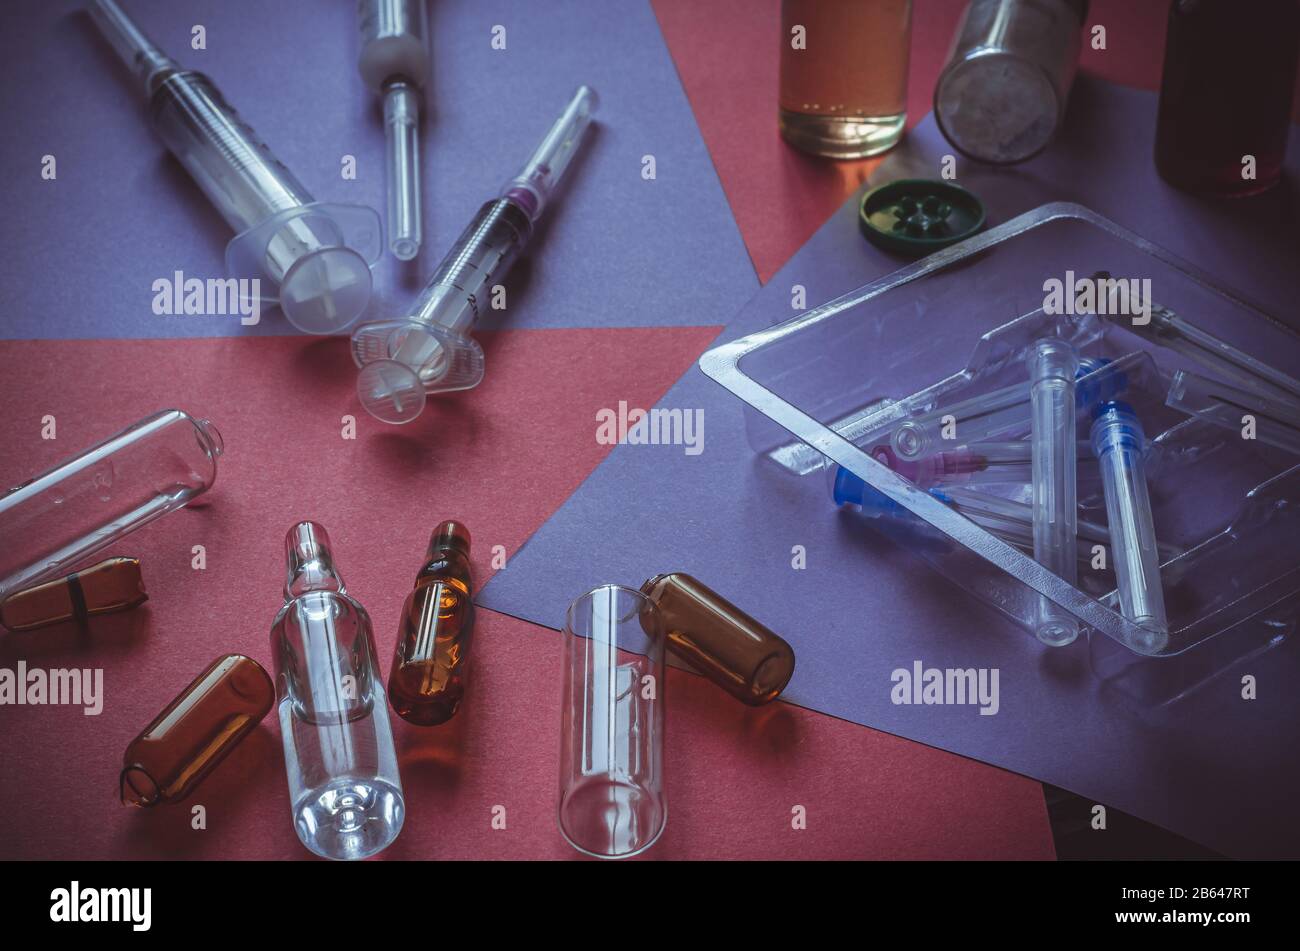 Medicines, syringes, ampoules on the table. Medications randomly scattered across the table. Hard work of doctors. Close-up. Selective focus. Without Stock Photo